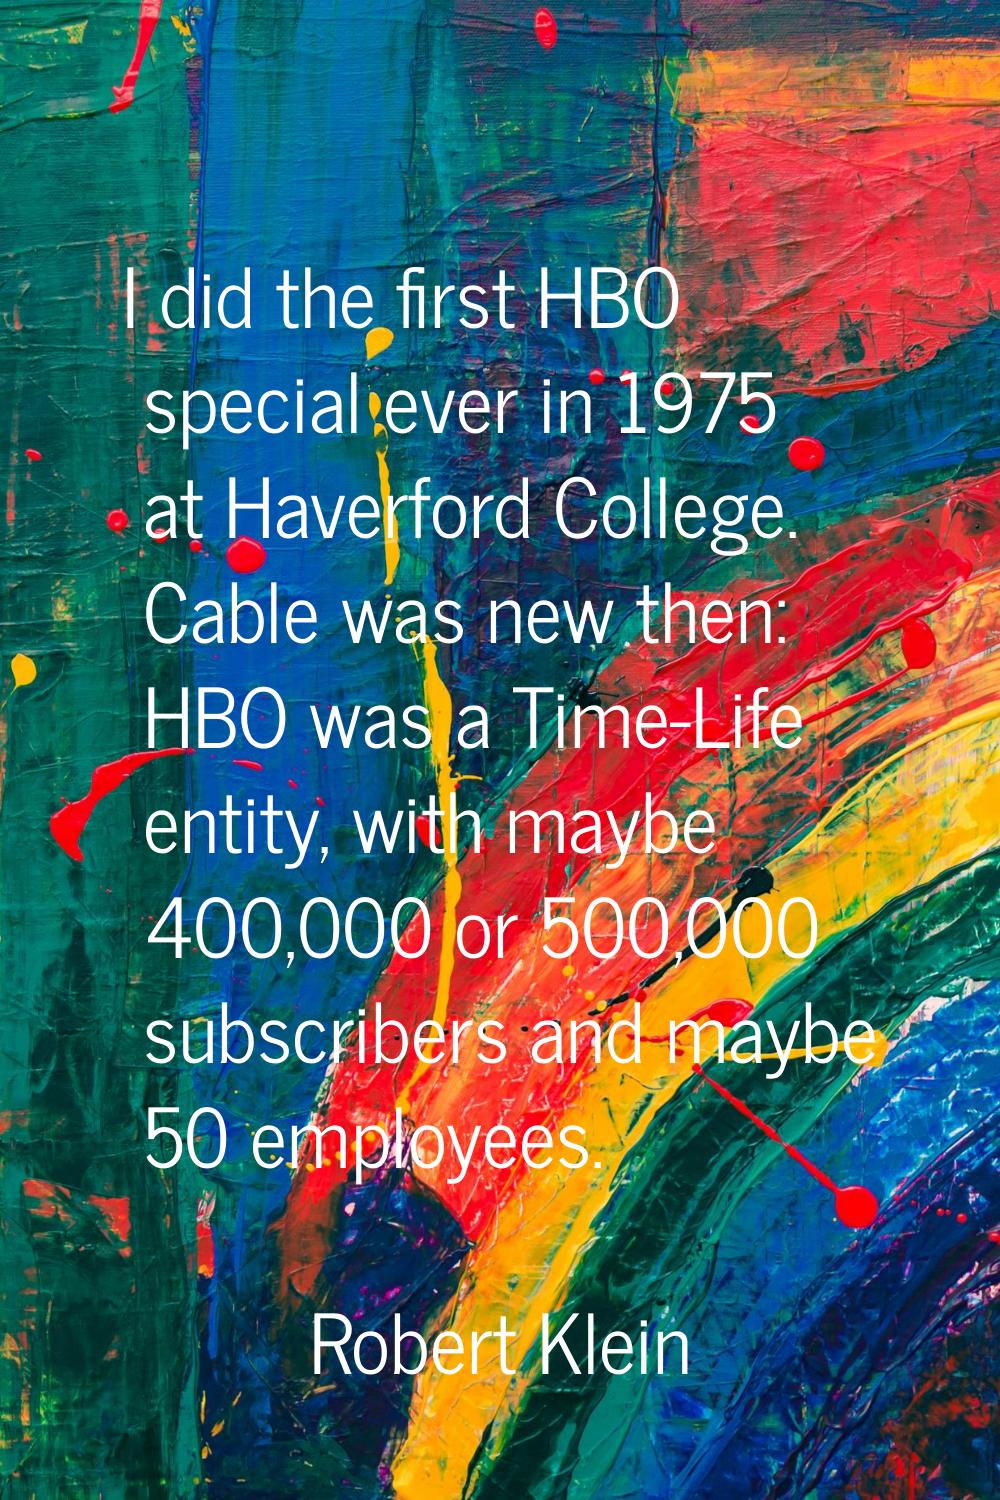 I did the first HBO special ever in 1975 at Haverford College. Cable was new then: HBO was a Time-L